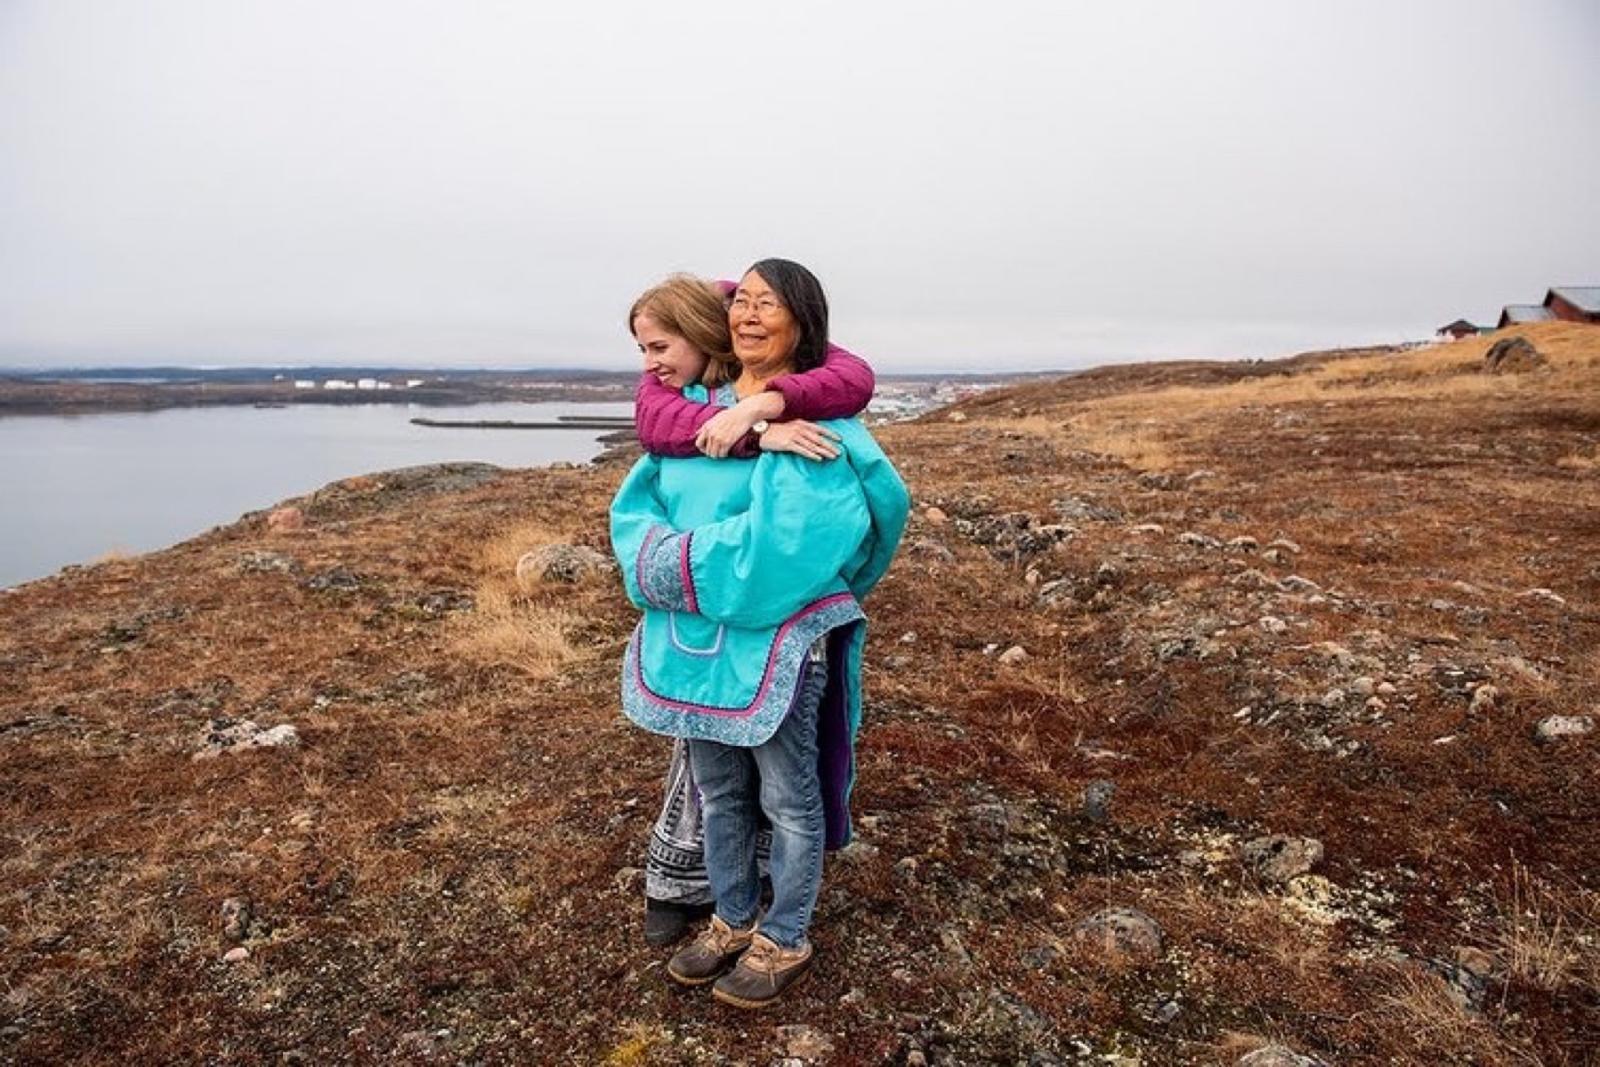 The Globe and Mail: Inuit Birthing Tradition and Modern Doula Care